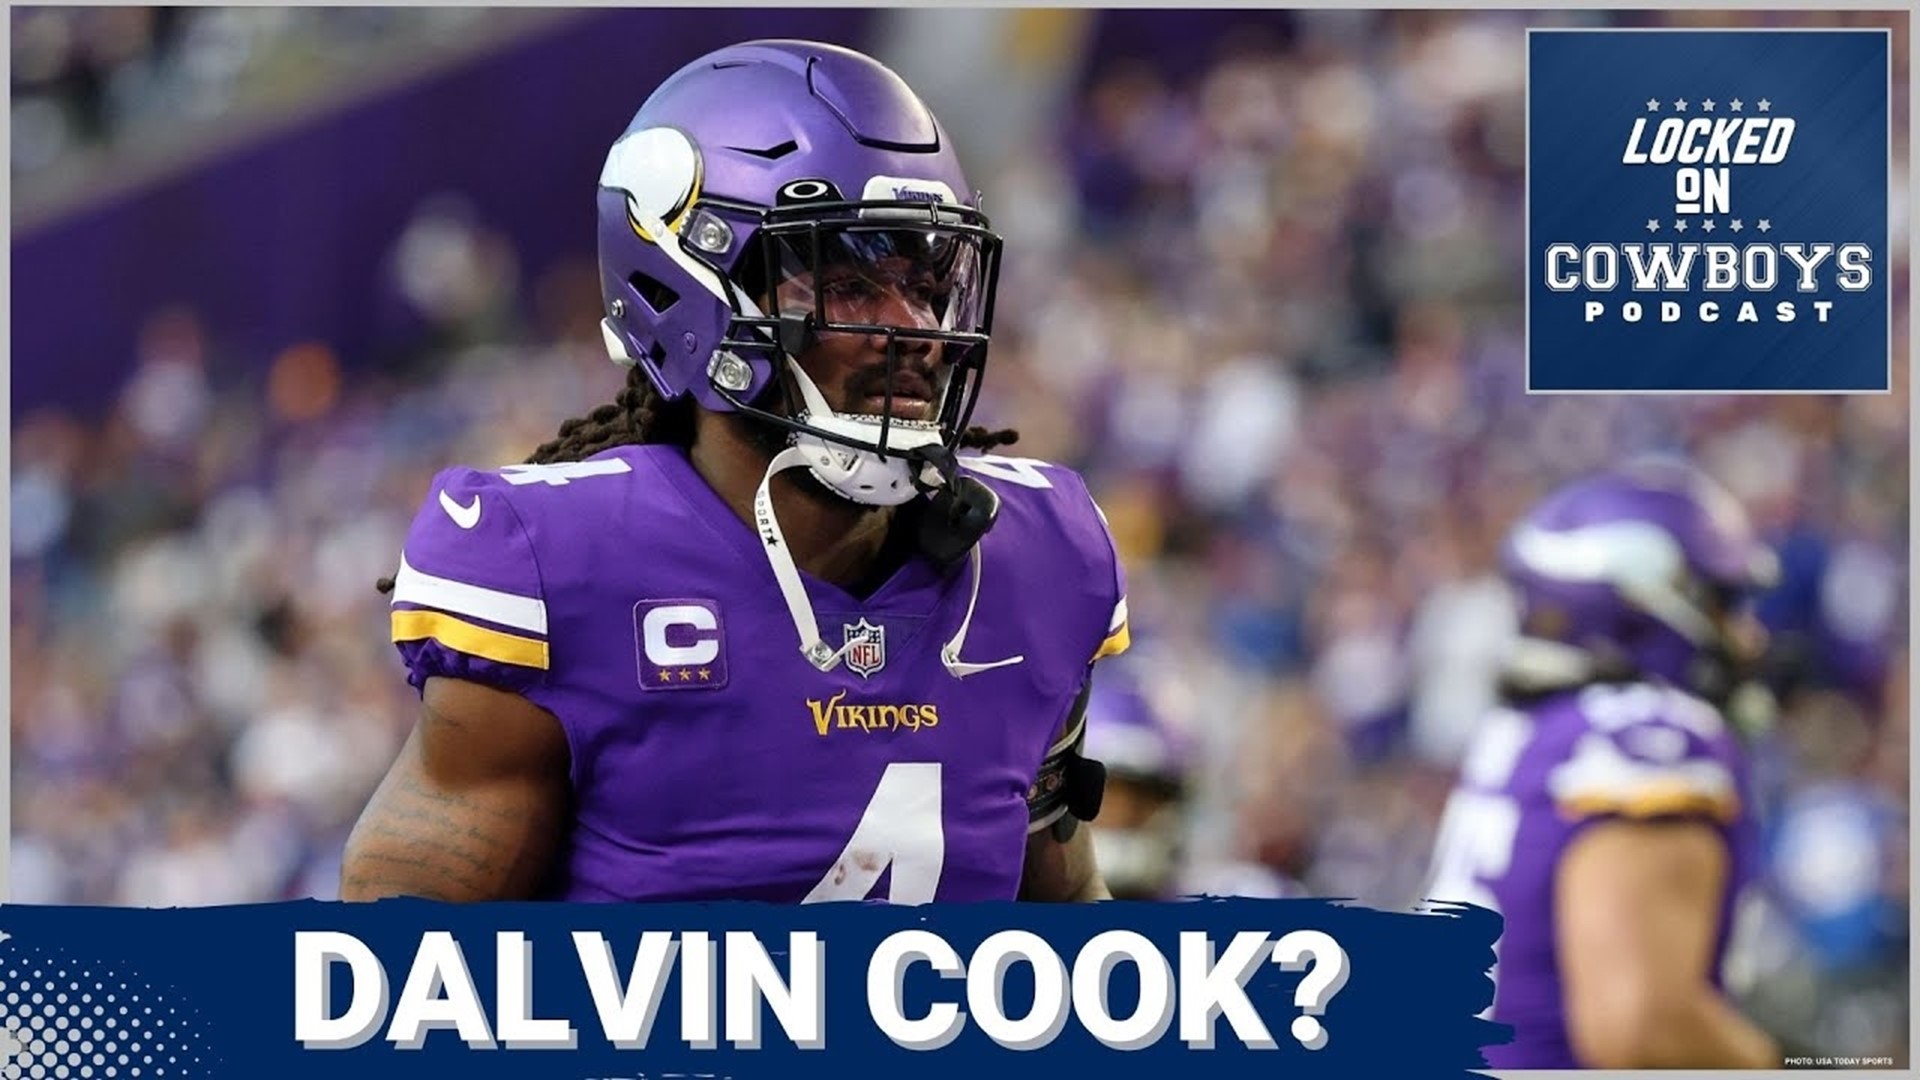 Marcus Mosher and Landon McCool answer your Twitter questions including should the Dallas Cowboys sign Dalvin Cook if he's released by the Vikings?